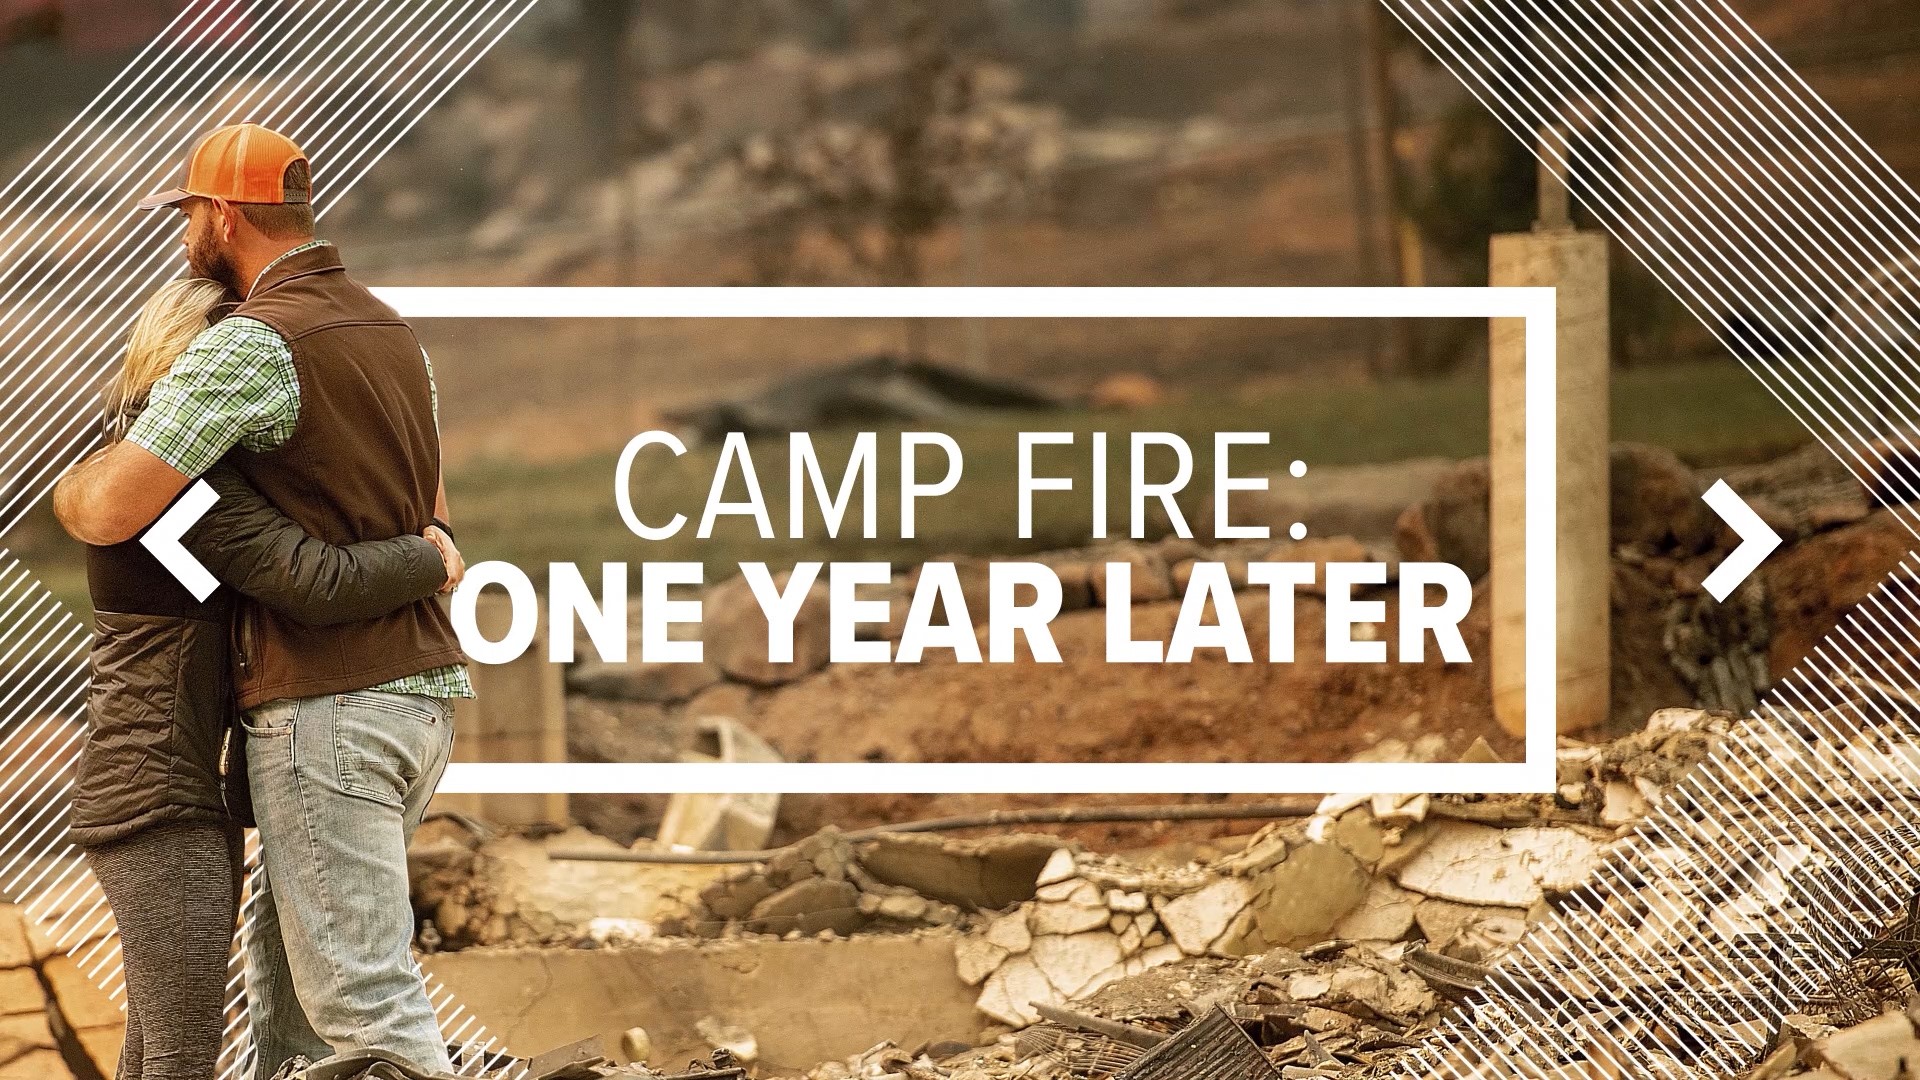 One year after the Camp Fire became the state’s deadliest and most destructive fire ever, the community of Paradise is rebuilding and remembering.